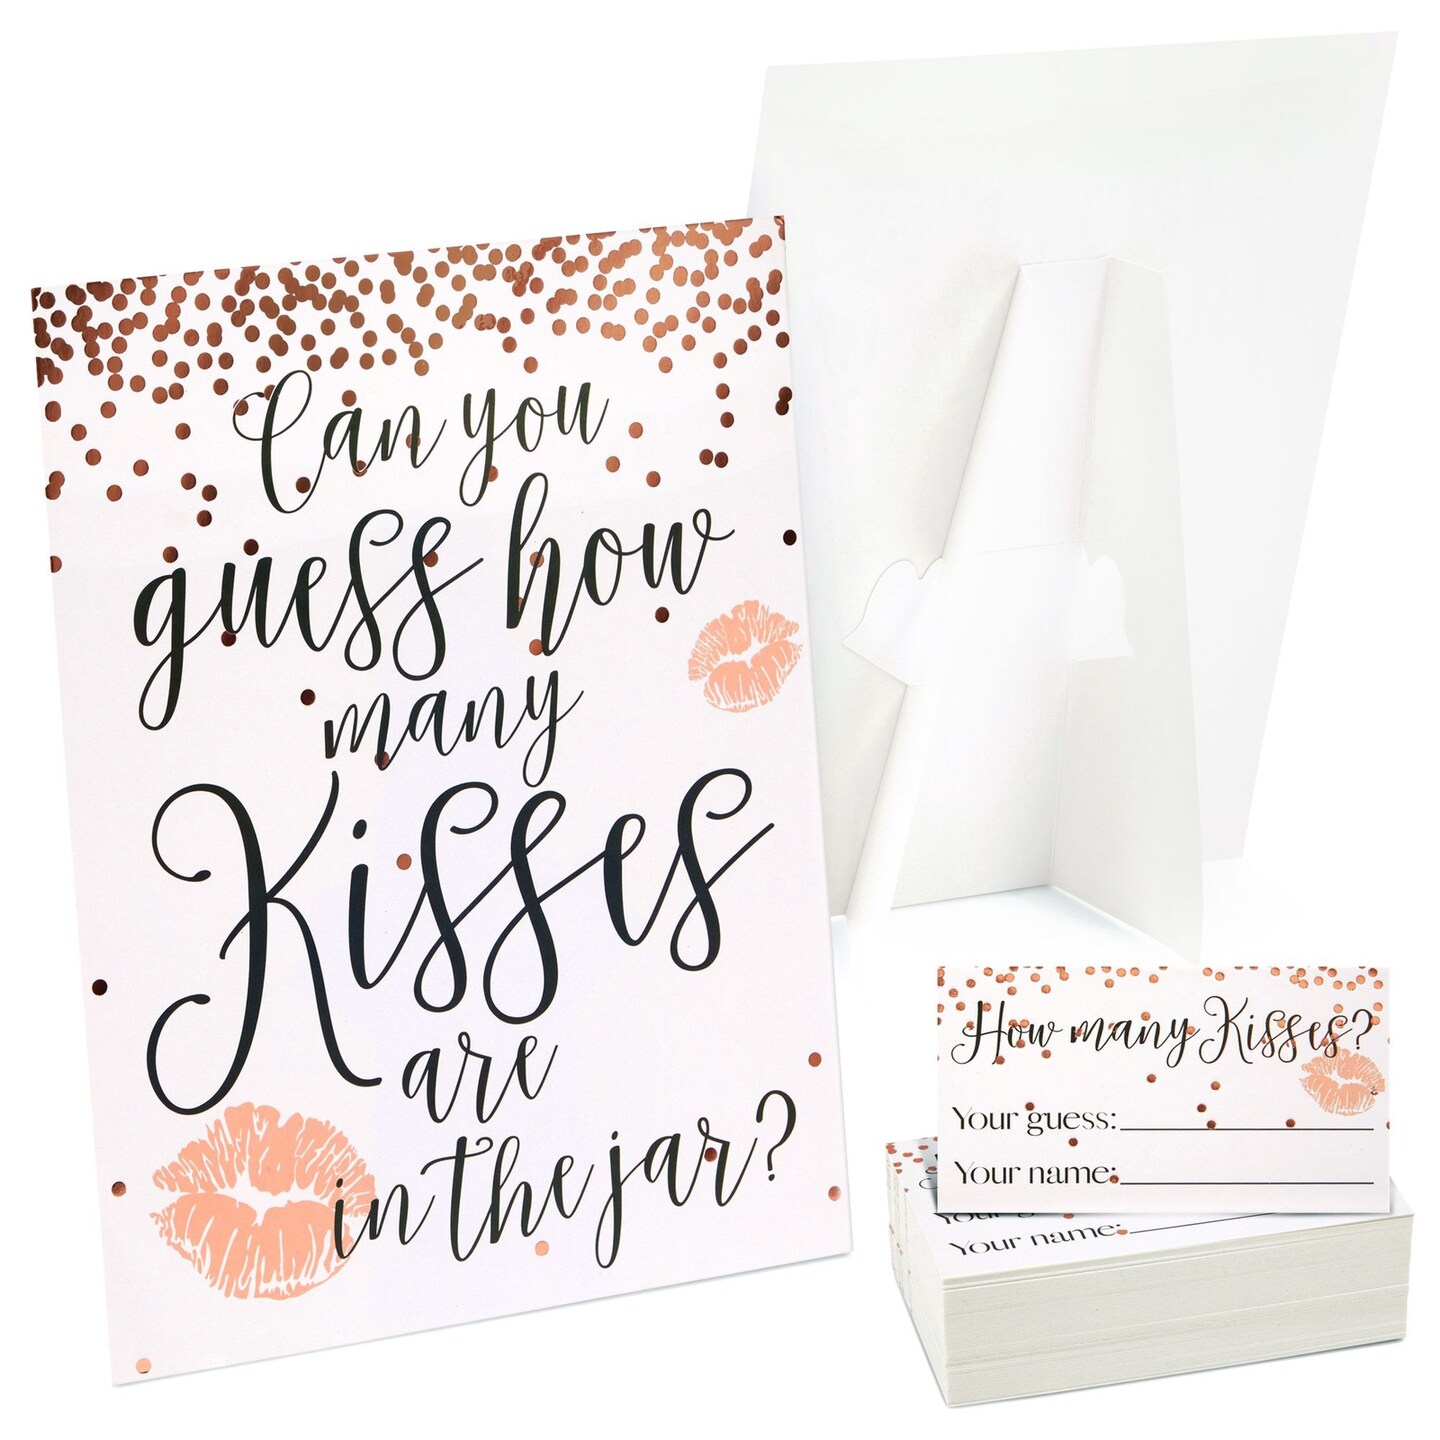 Guess How Many Kisses Bridal Shower Game for 60 Guests for Wedding (1 Rule Board, 60 Guessing Cards)